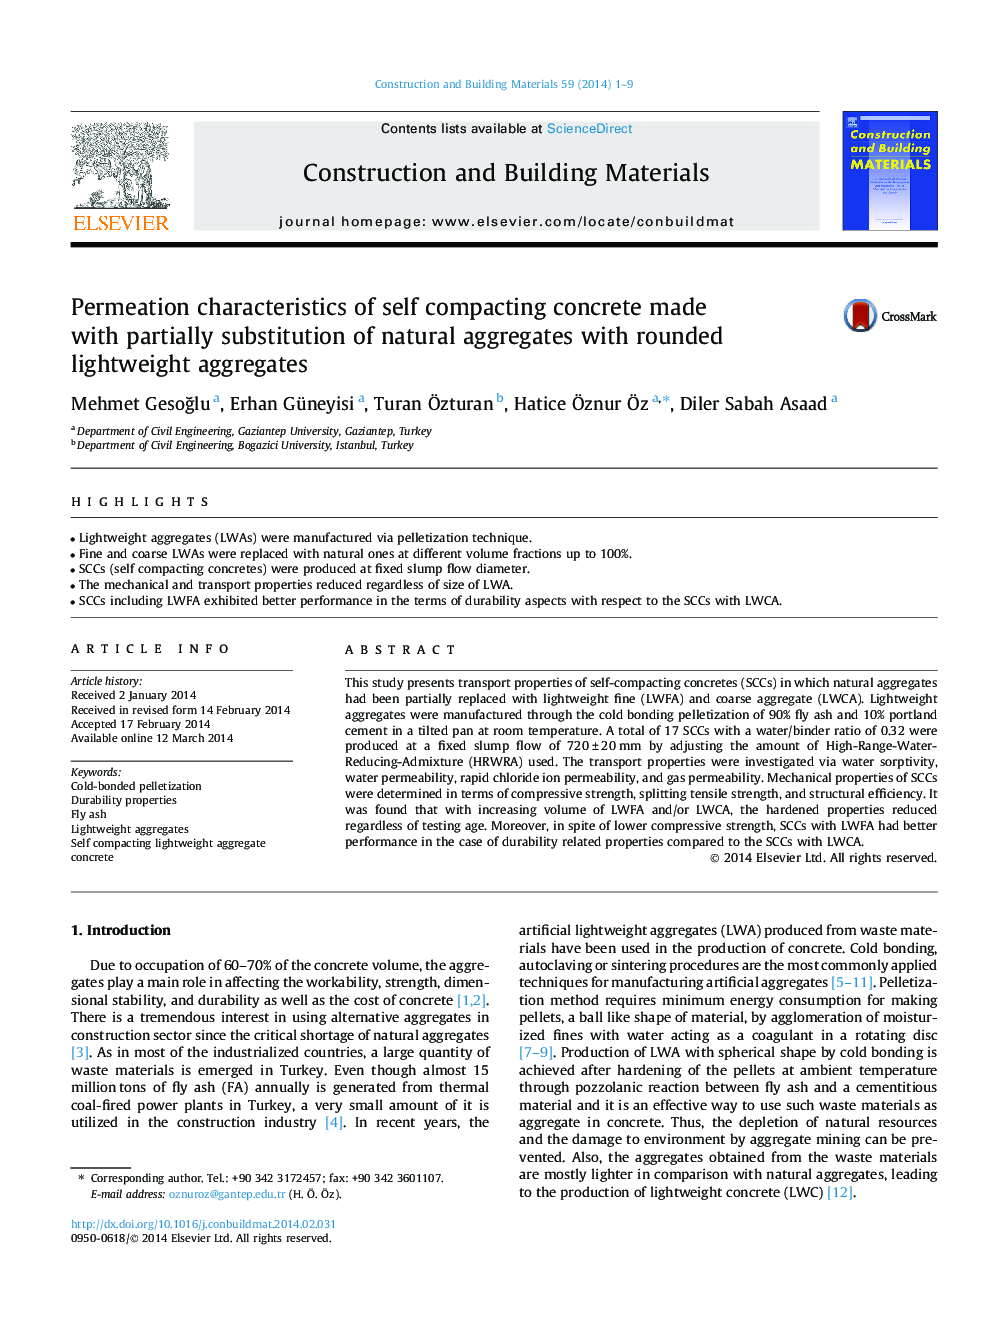 Permeation characteristics of self compacting concrete made with partially substitution of natural aggregates with rounded lightweight aggregates